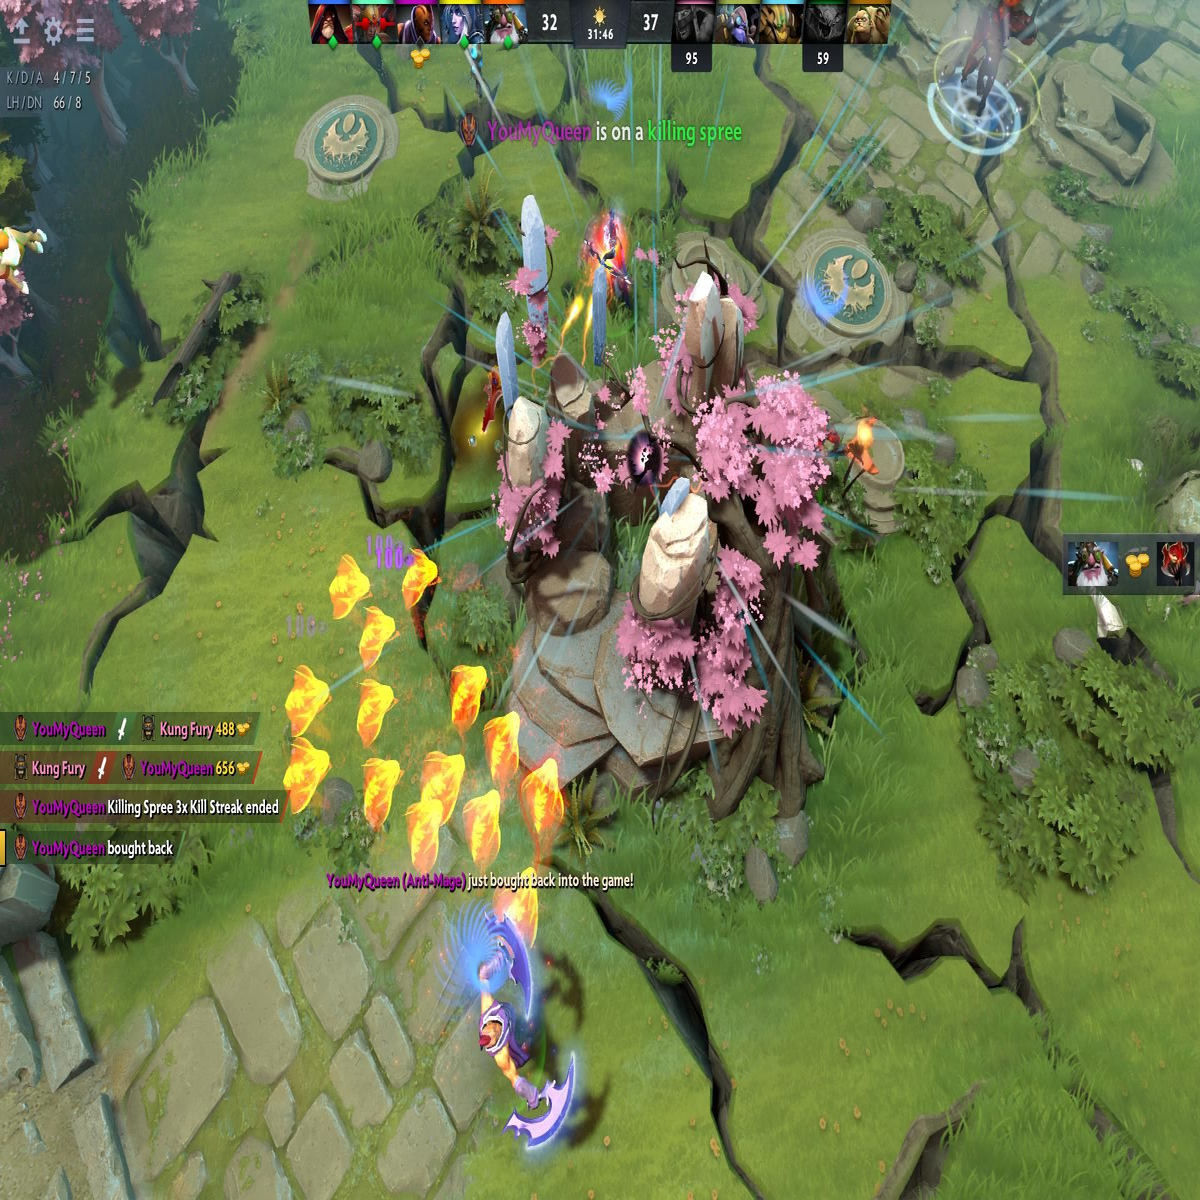 Valve on Dota 2 Reborn, community, and building a game for the long term